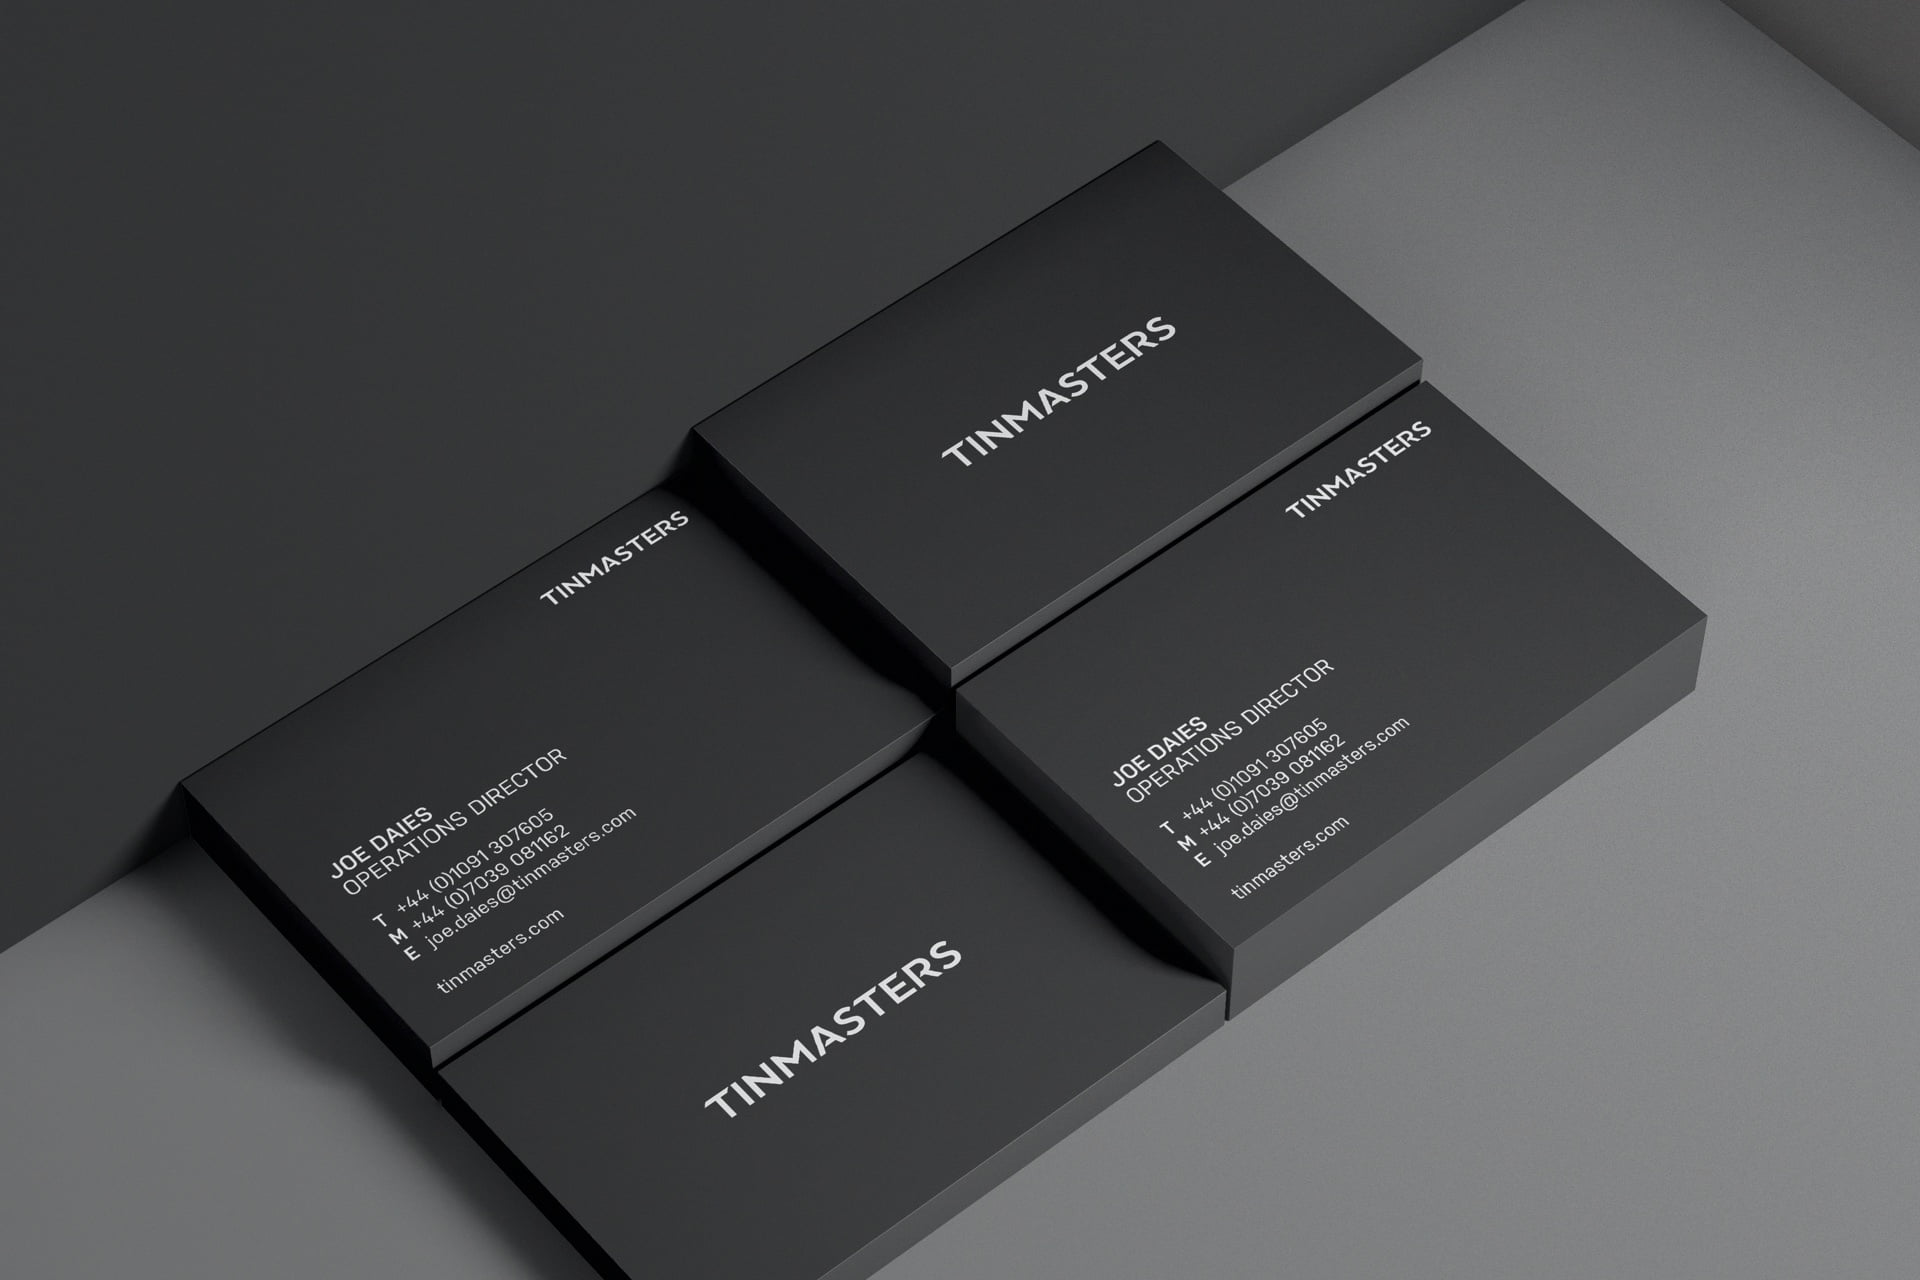 New business card designs for the Tinmasters